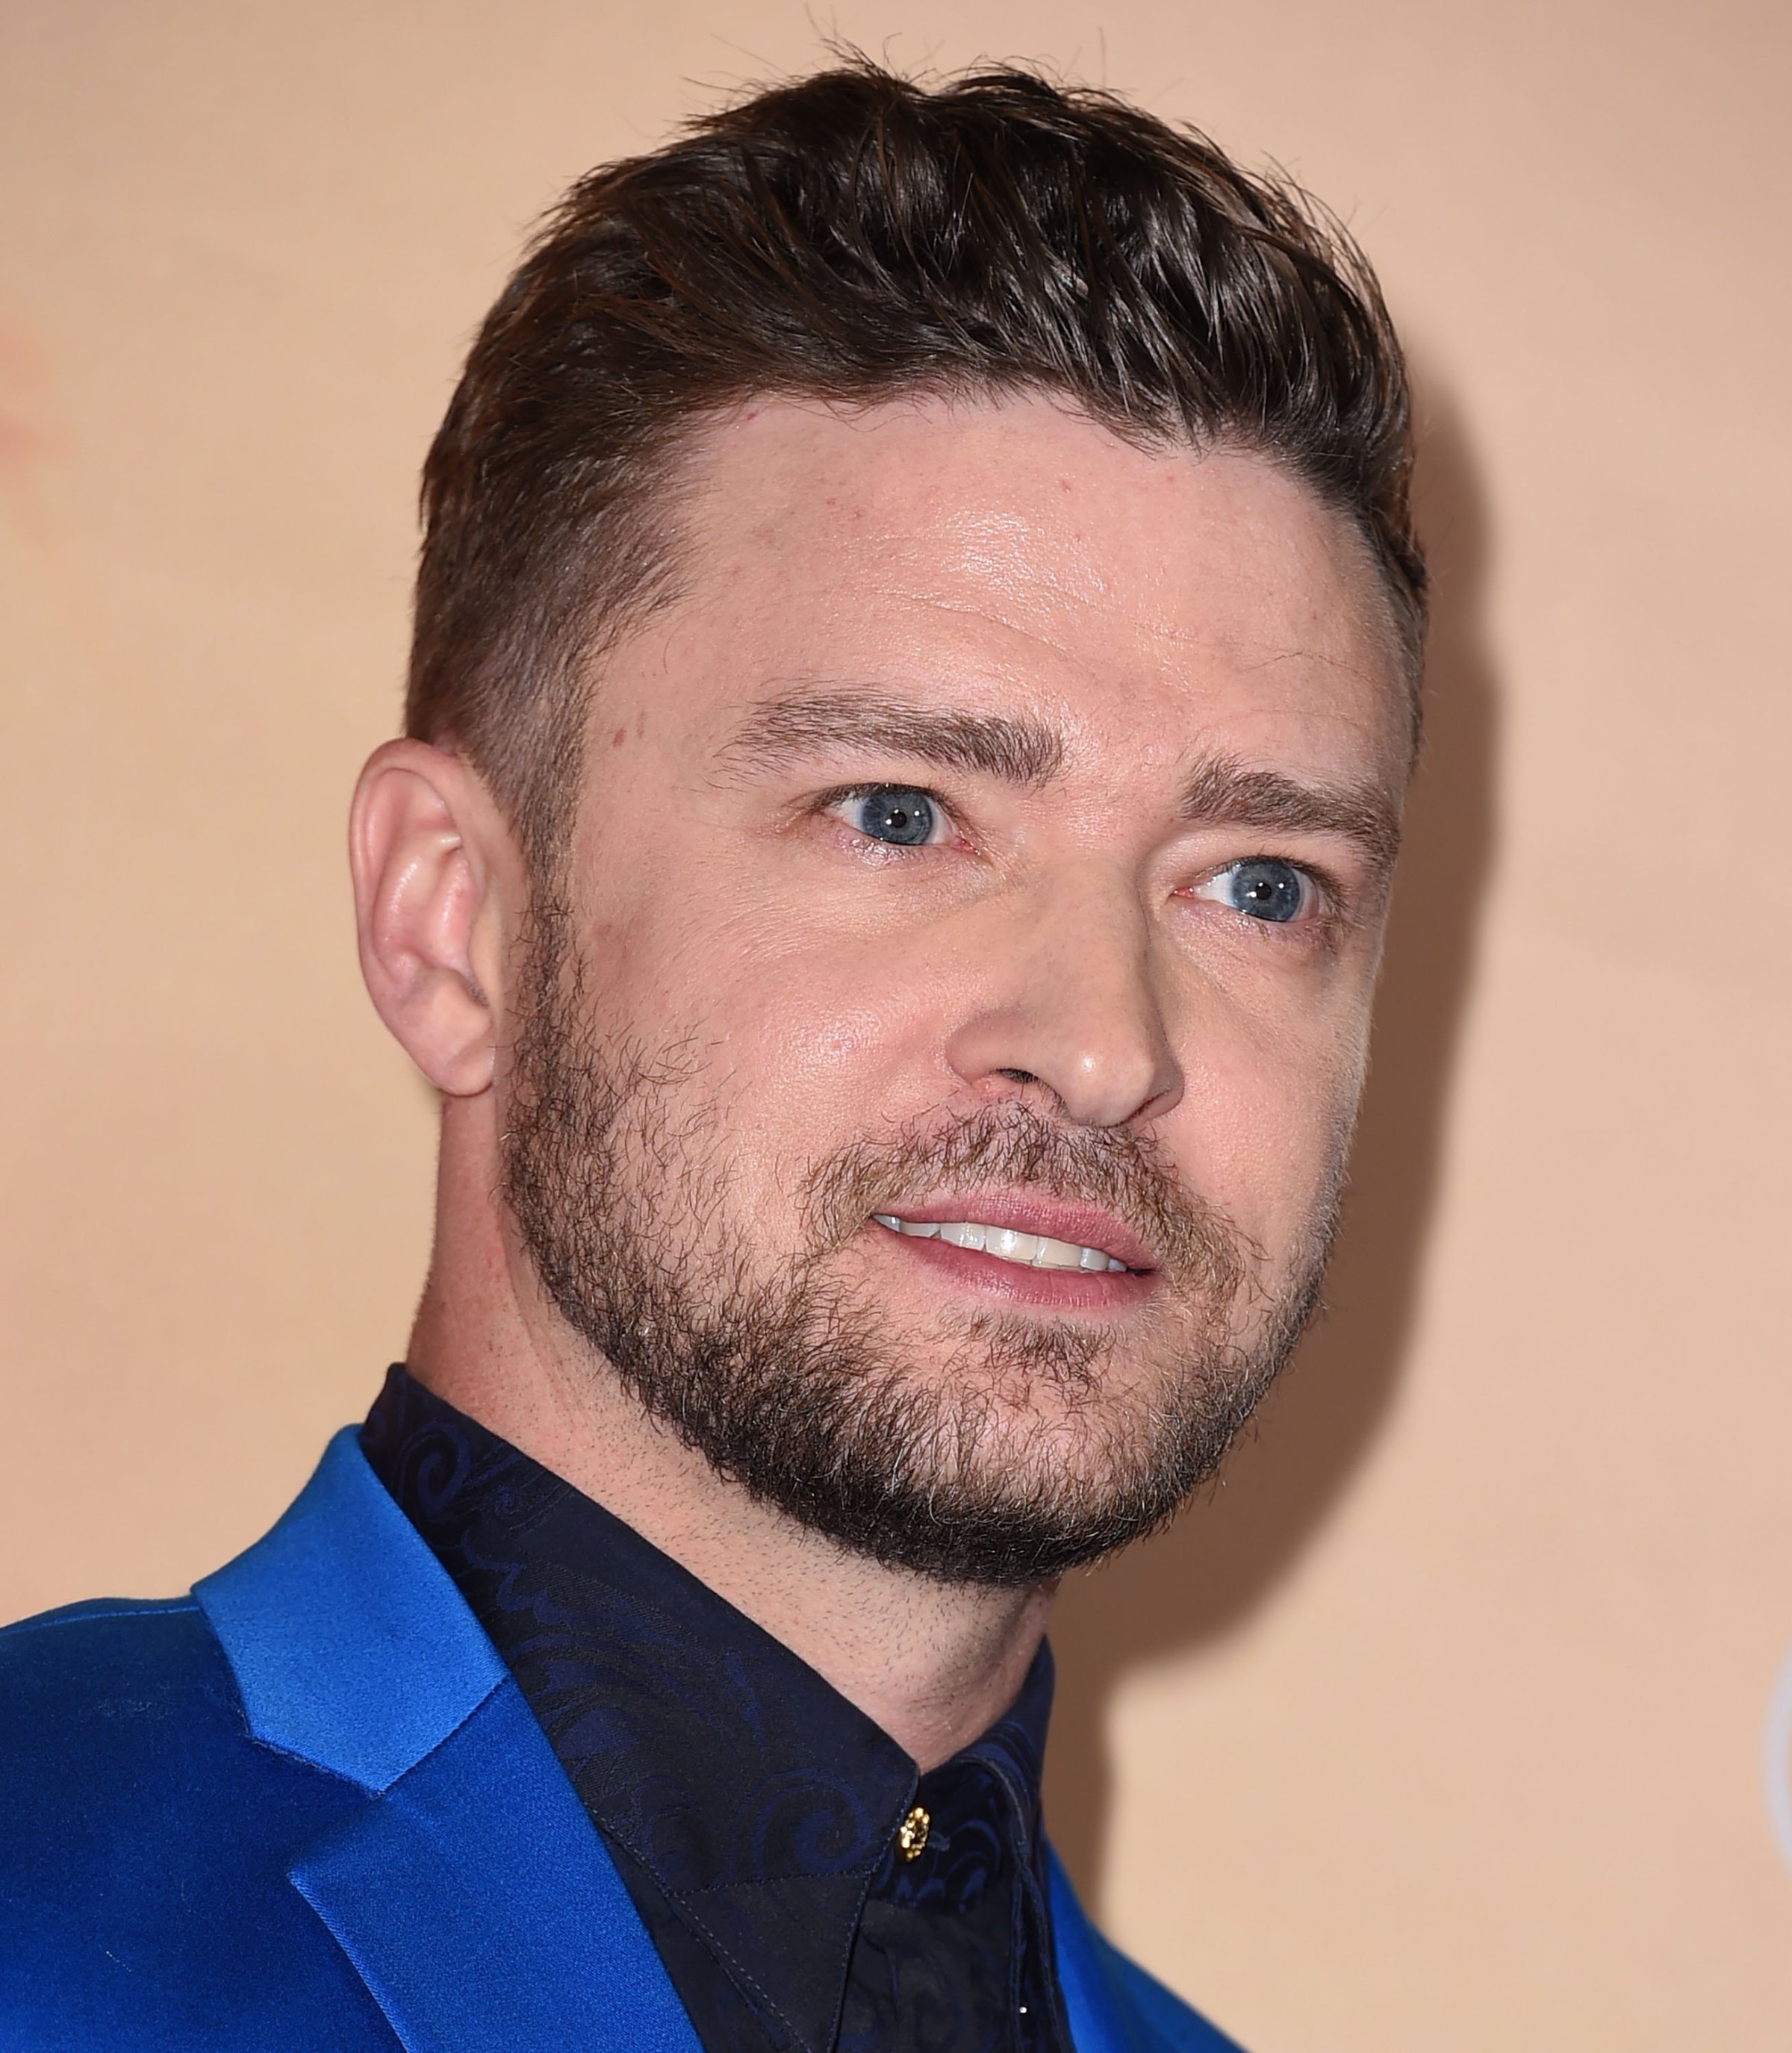 Justin Timberlake at the 2015 iHeartRadio Music Awards in Los Angeles on March 29, 2015.